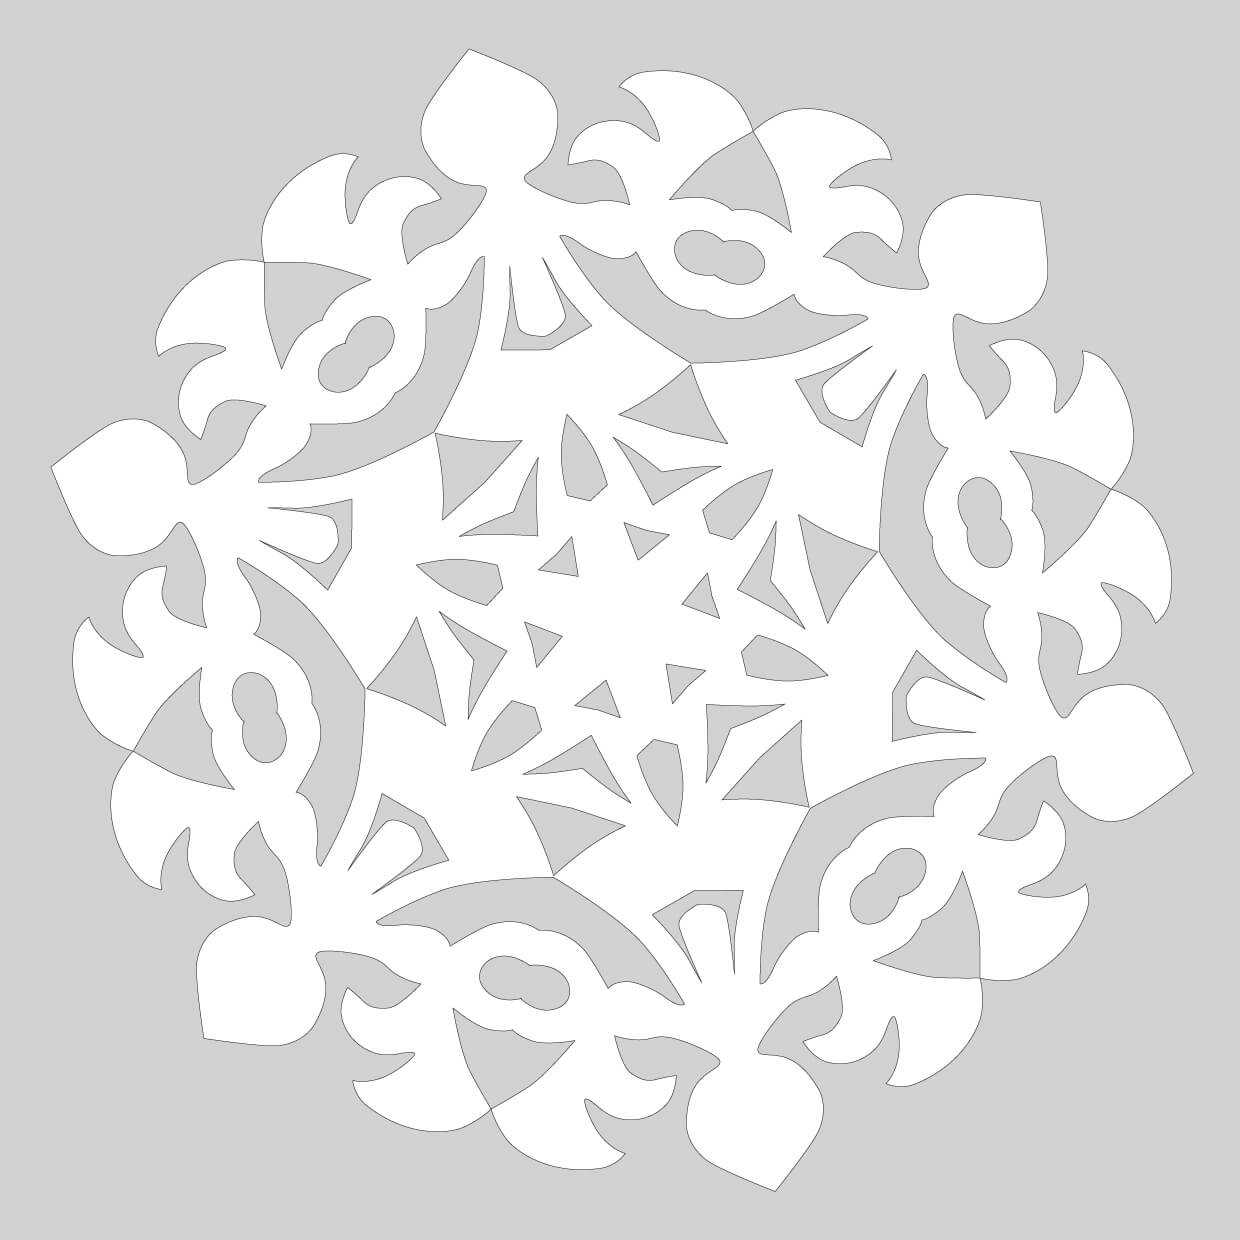 Blank Template To Draw A Pattern For Paper Snowflake | Free Within Blank Snowflake Template